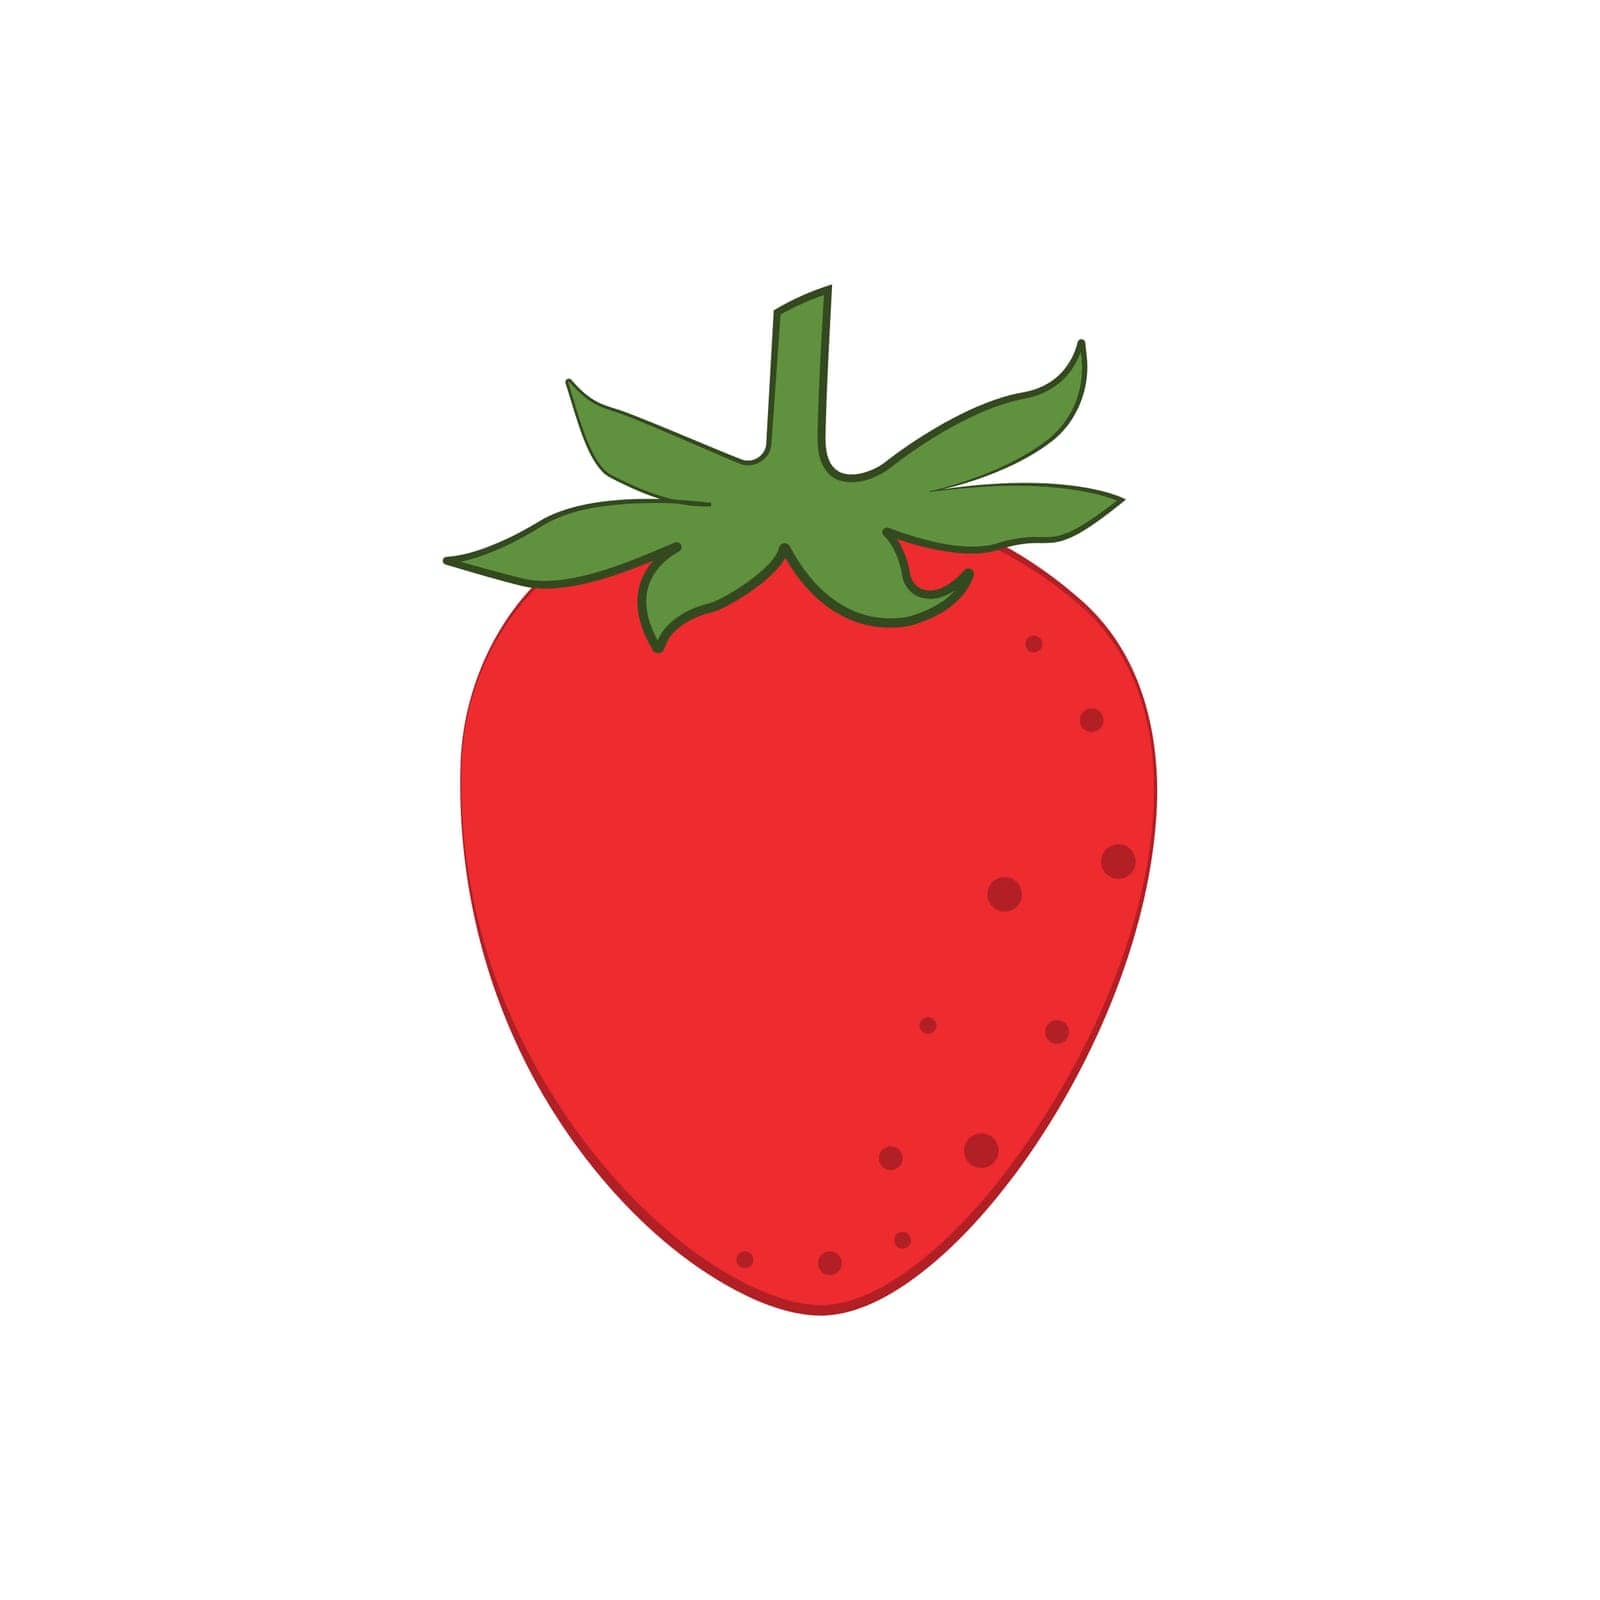 Strawberry. Ripe strawberries. Red sweet strawberries in cartoon style. A garden berry. Children s illustration of strawberries. Vector illustration isolated on a white background.